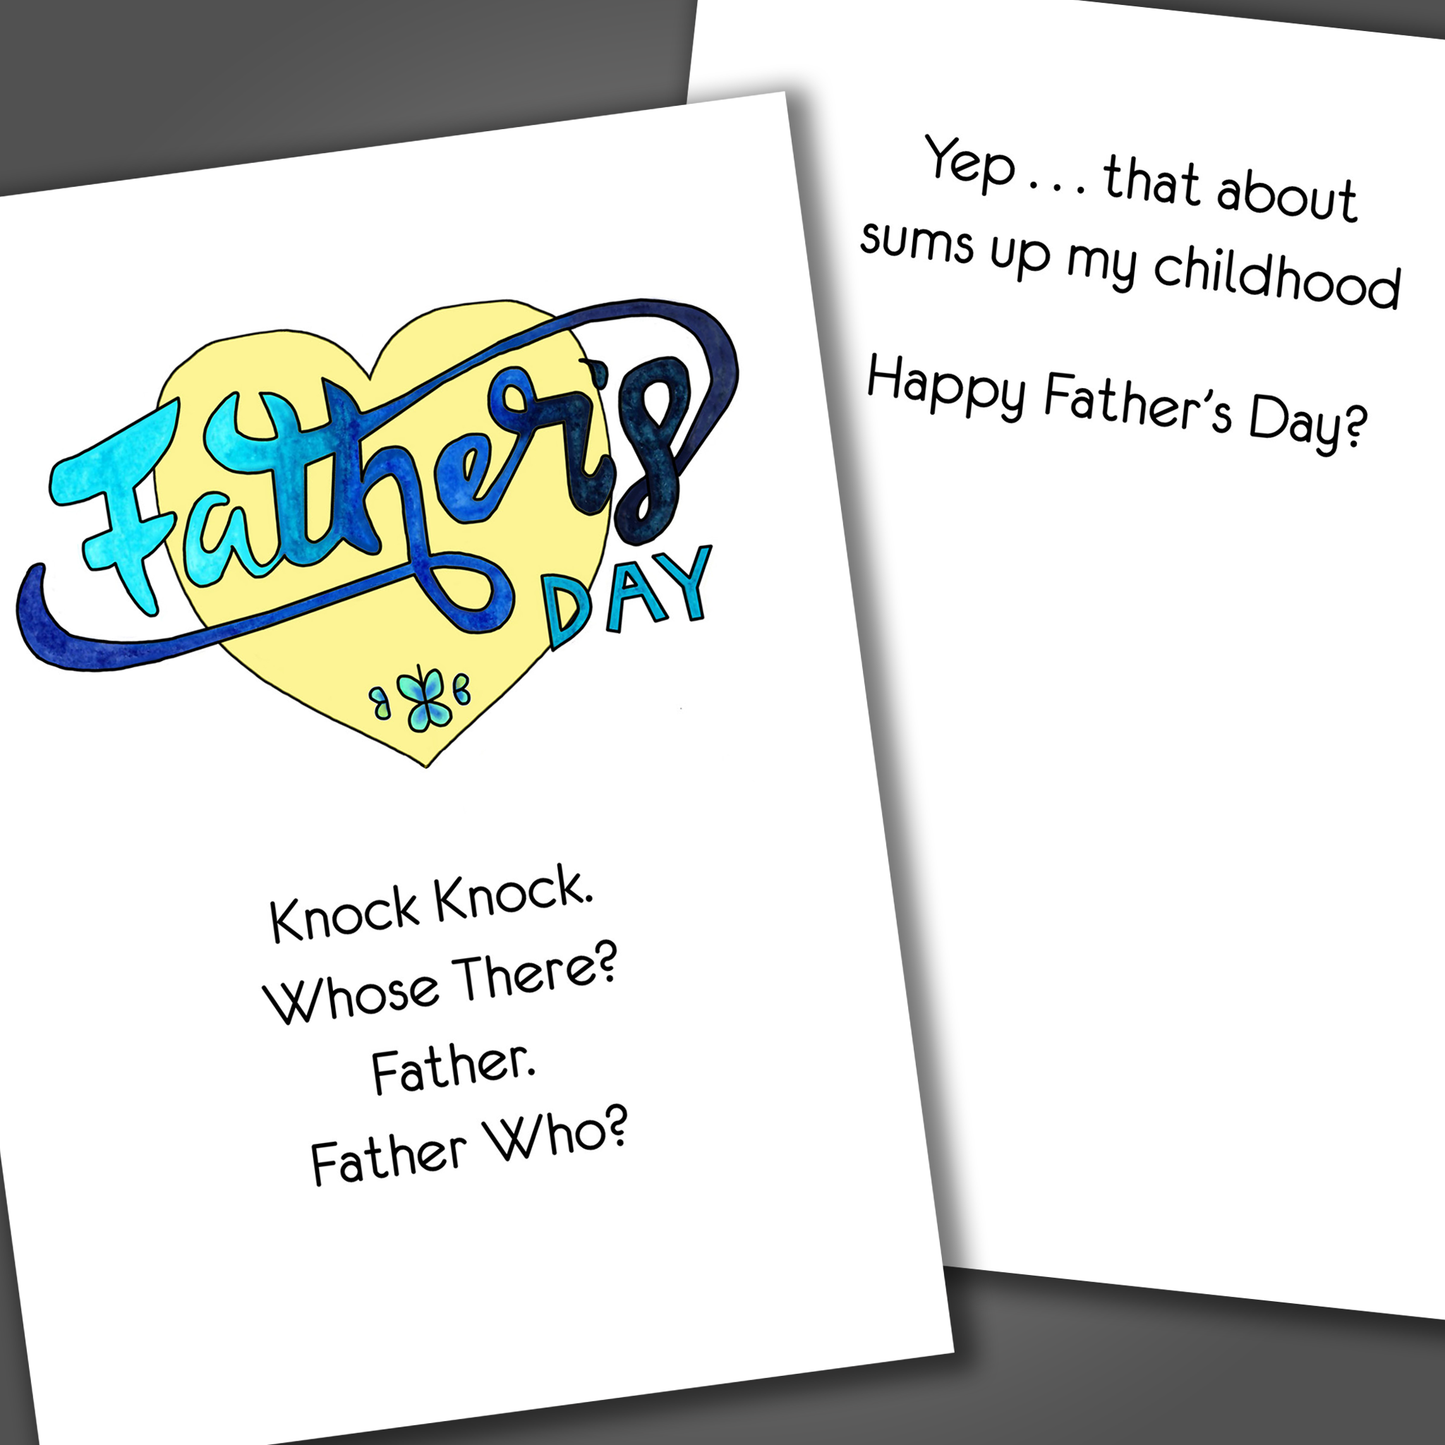 Funny happy father's day card with a yellow heart and father's day drawn on the front of the card. Inside is a knock-knock joke that says father who? Yep that was my childhood.